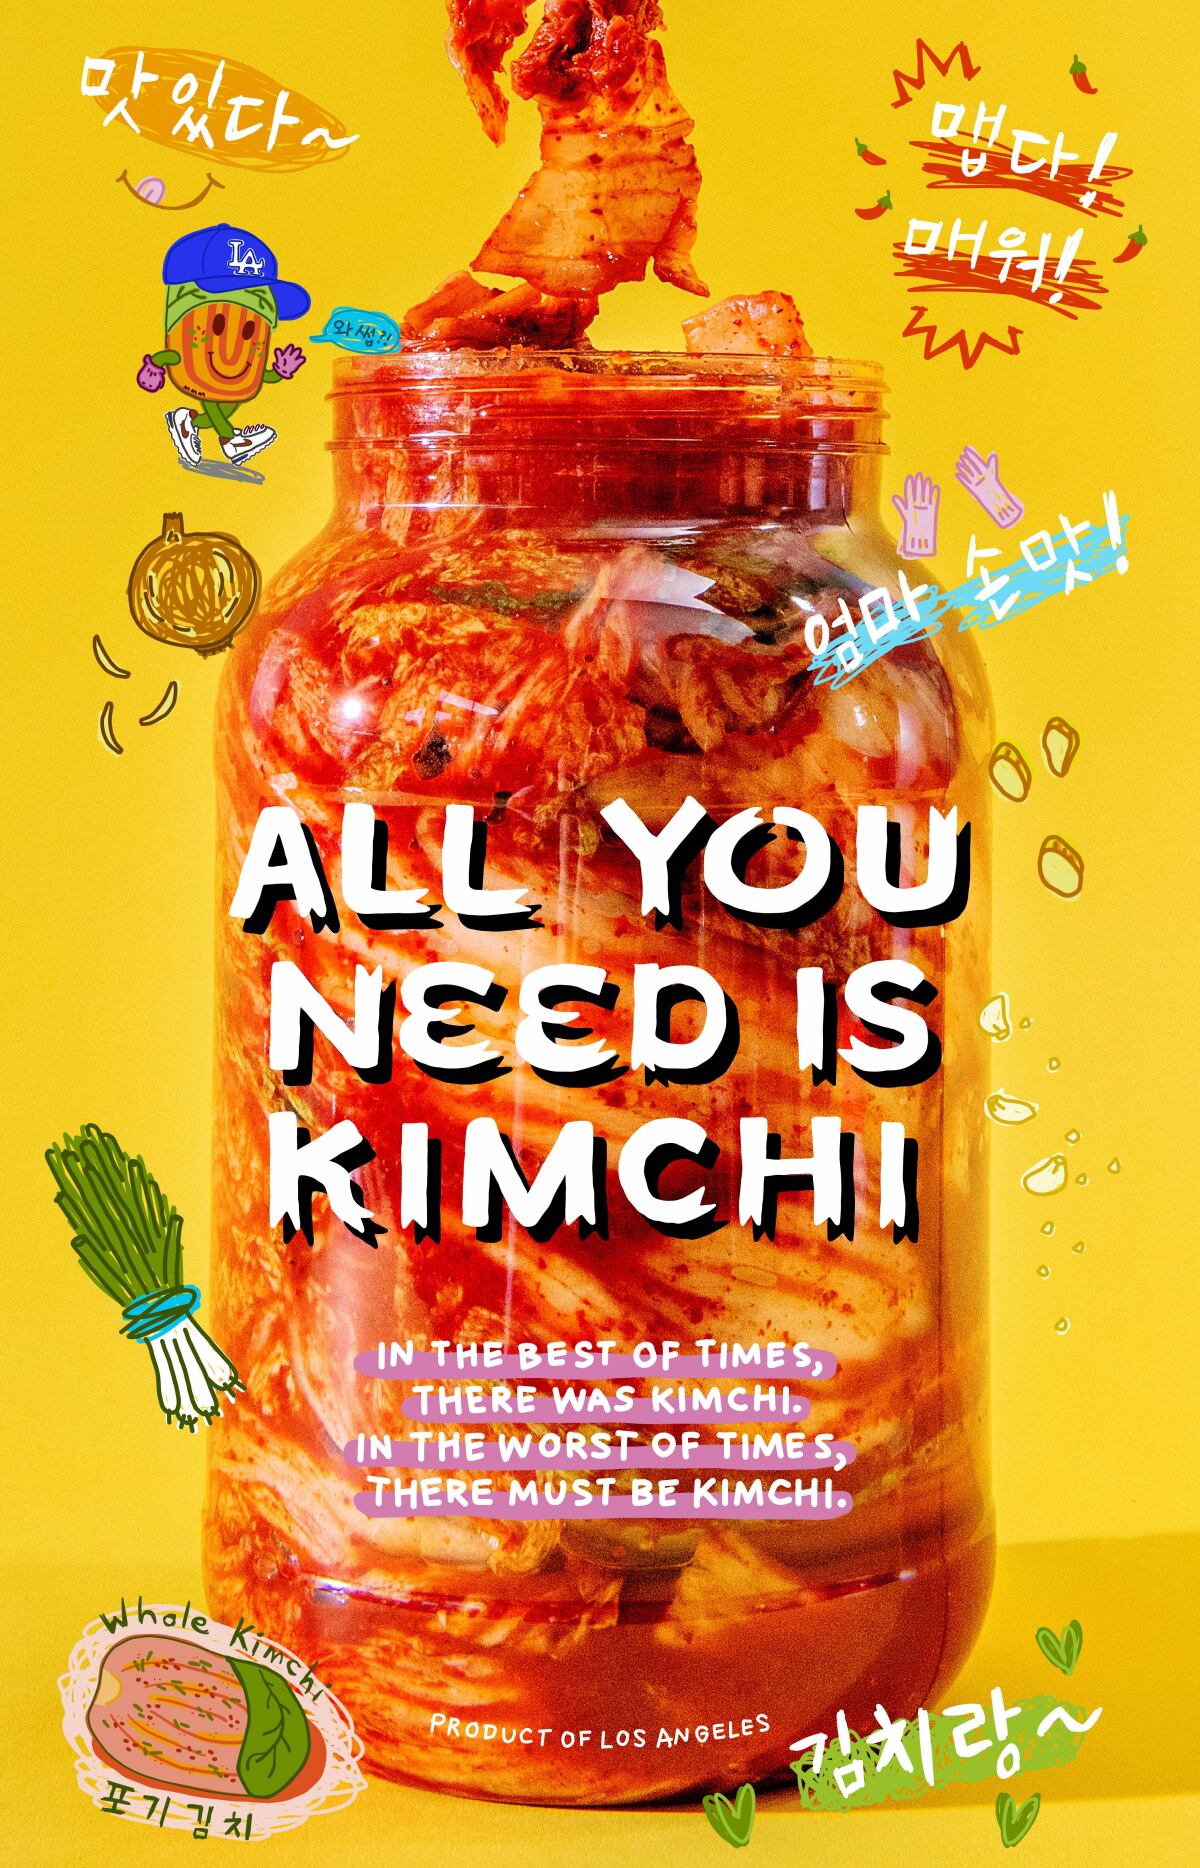 Photo of kimchi jar with illustrations of kimchi ingredients and Korean phrases